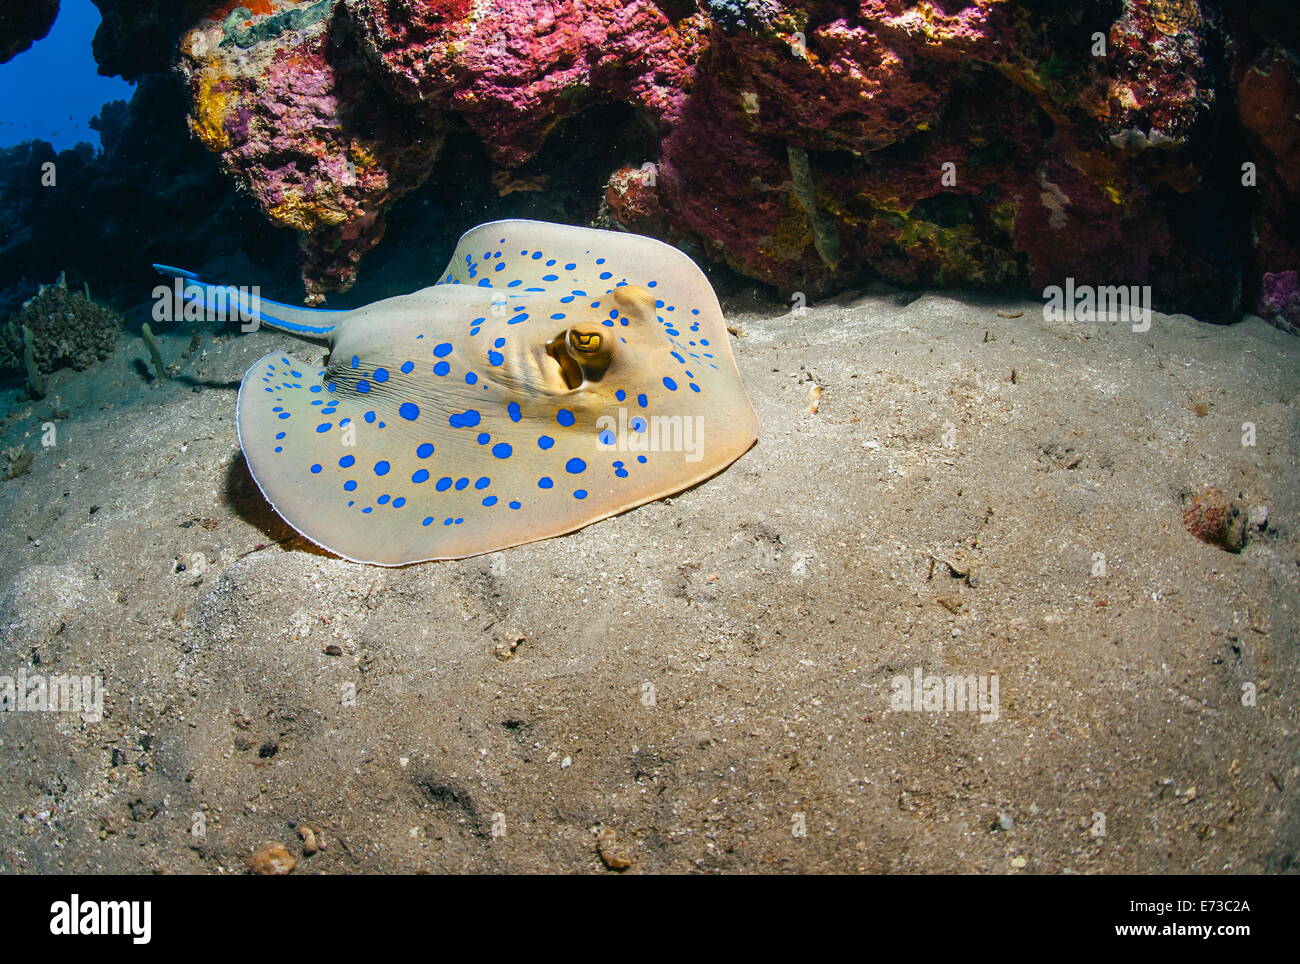 Bluespotted stingray (Taeniura lymma), front side view, Naama Bay, Sharm El Sheikh, Red Sea, Egypt, North Africa, Africa Stock Photo